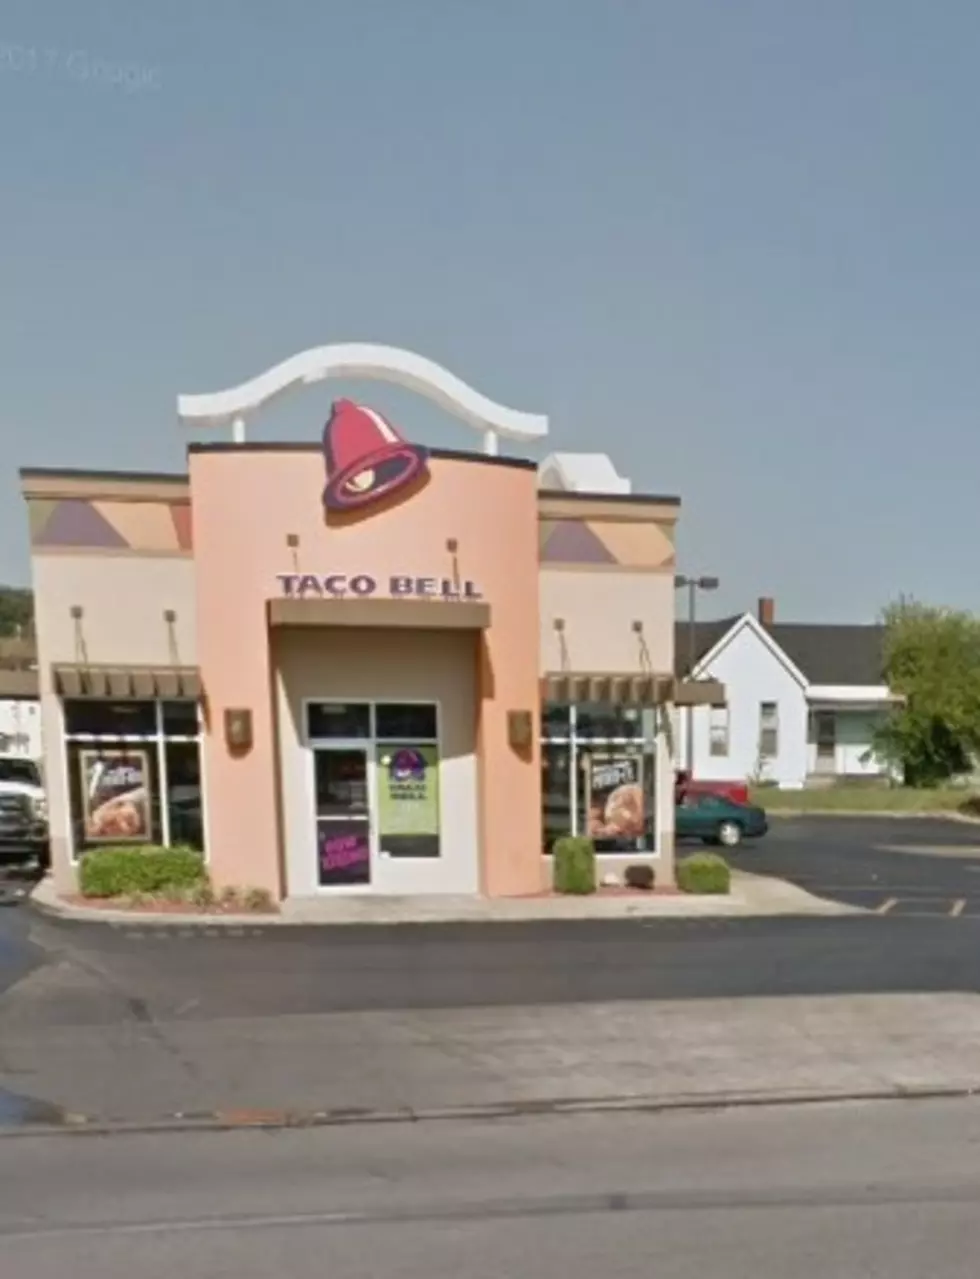 A Simple Act of Kindness by a Taco Bell Employee Made My Night